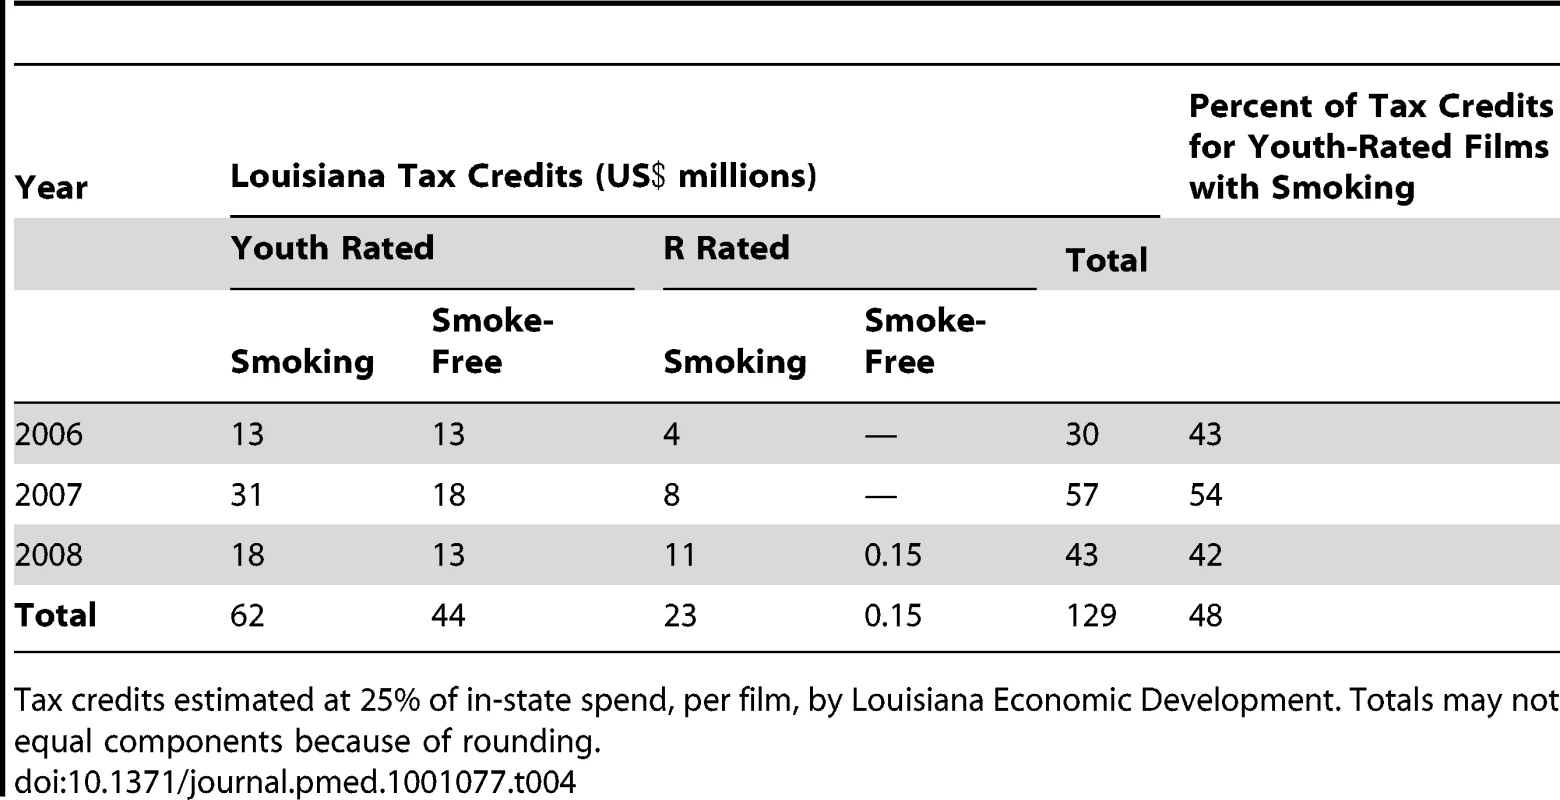 Louisiana (US) tax credits for wide-release films, by rating and tobacco imagery, 2006–2008.